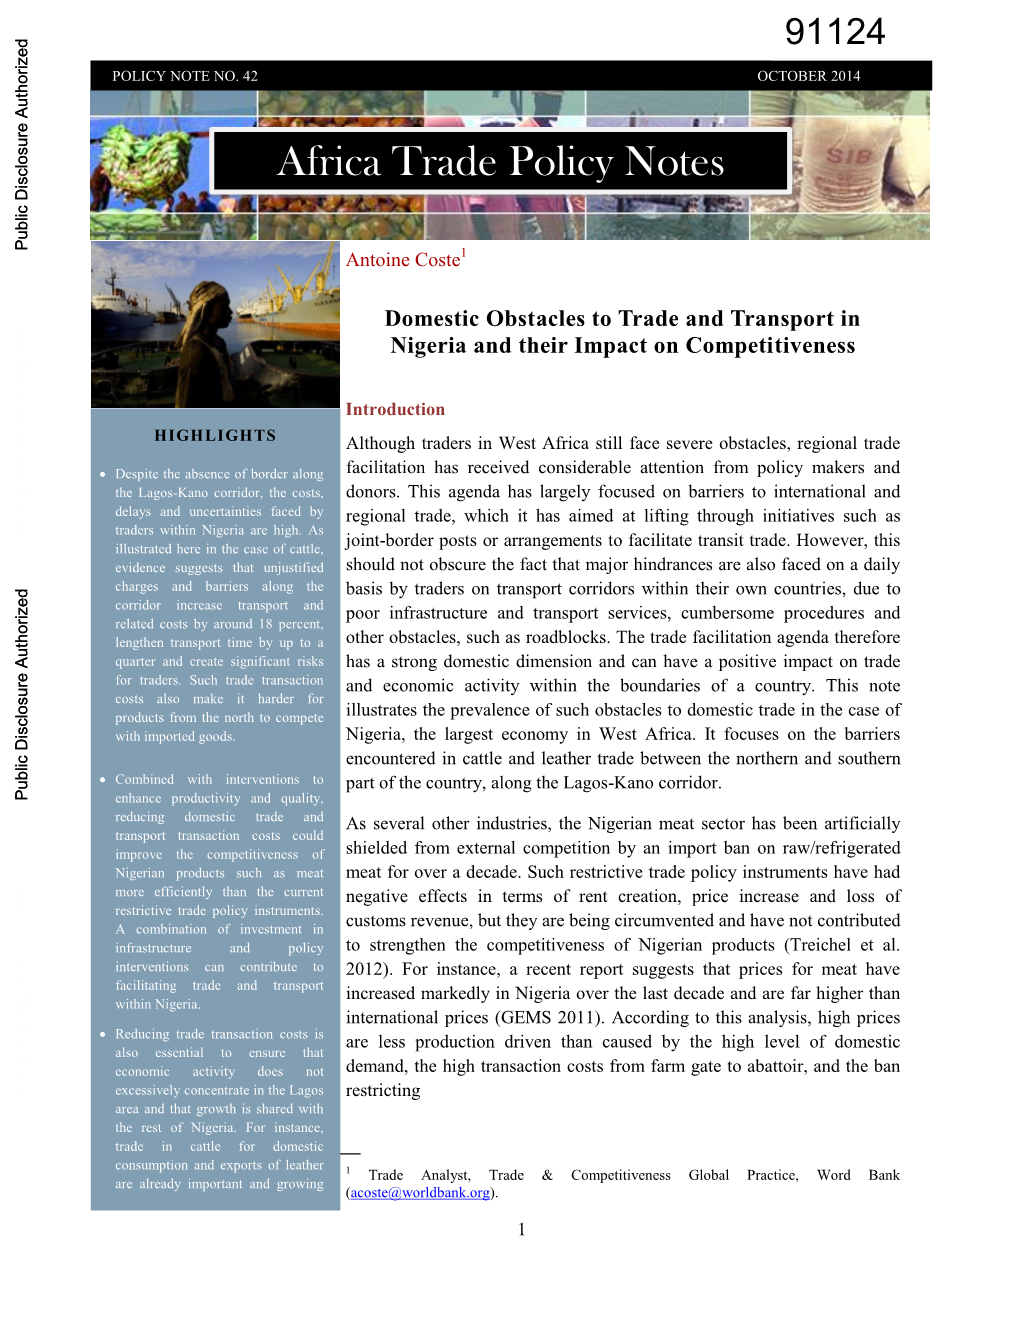 Africa Trade Policy Notes